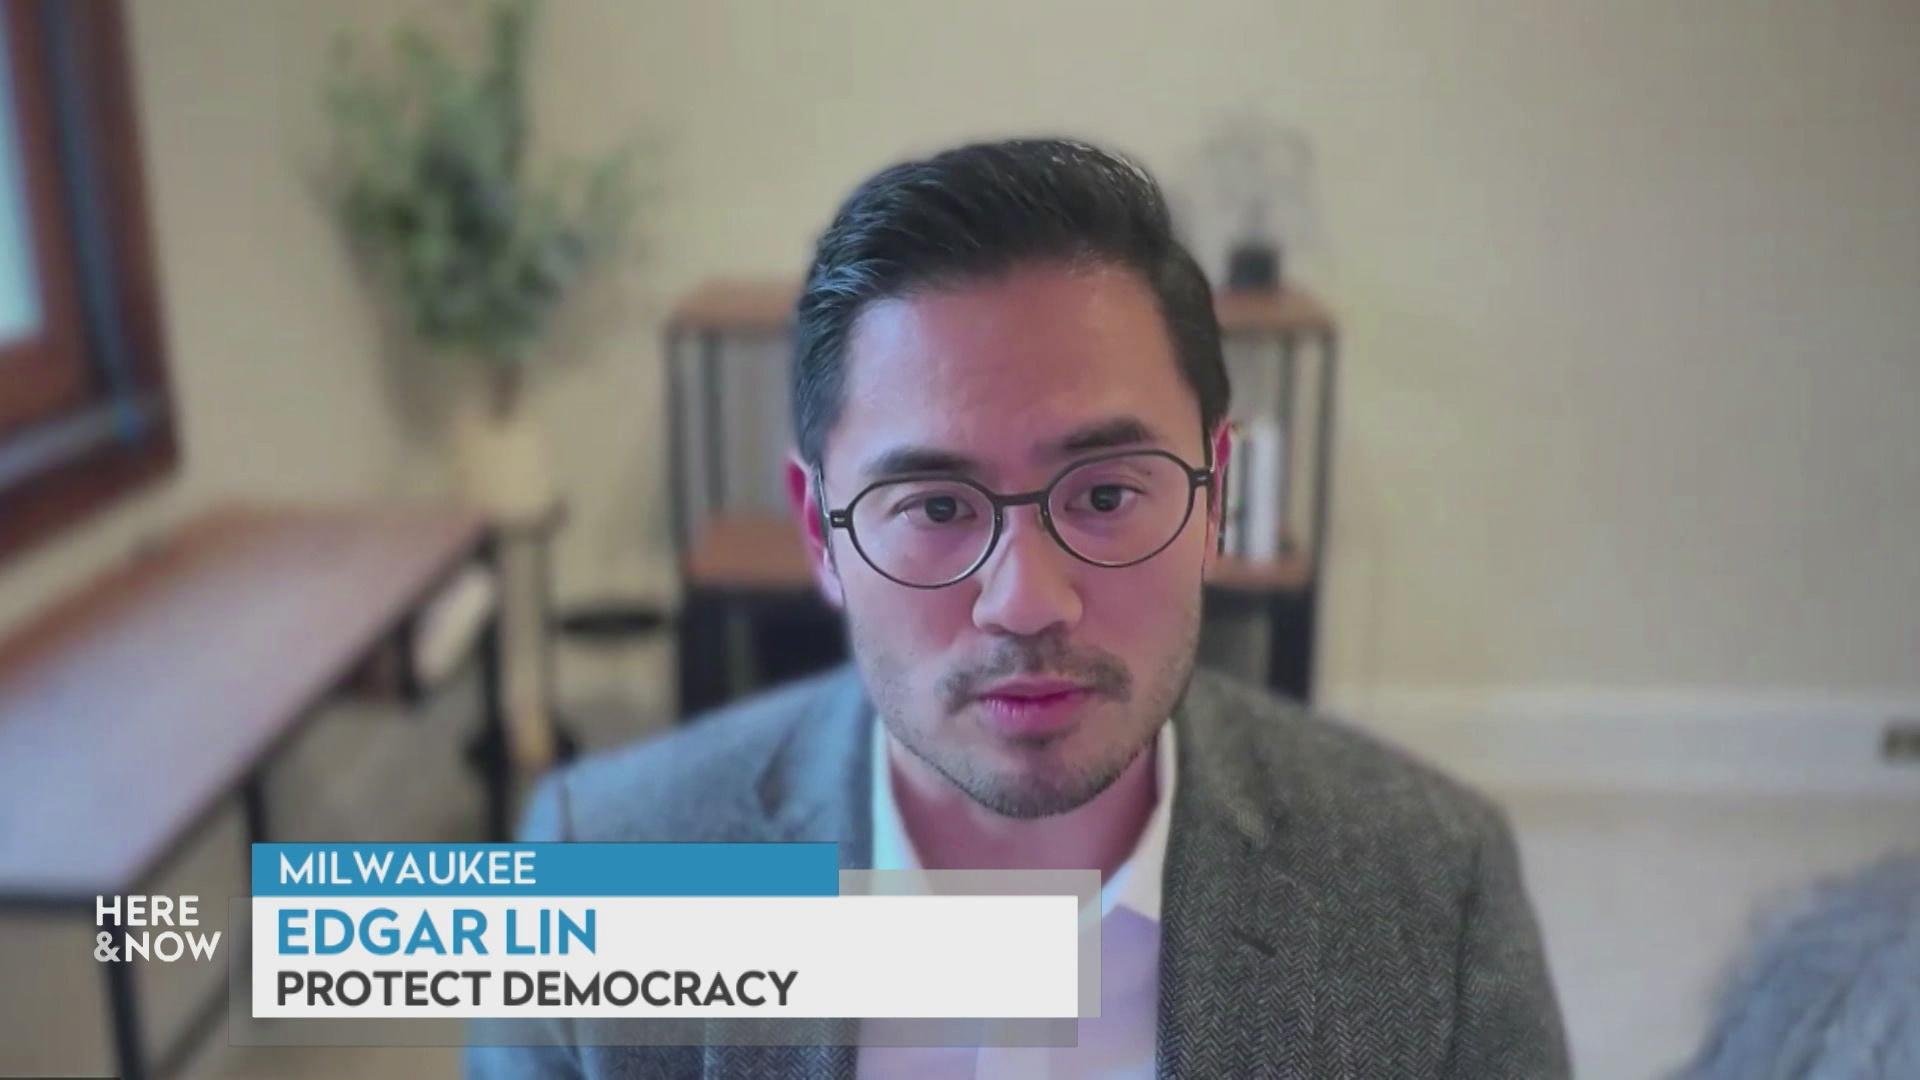 A still image from a video shows Edgar Lin  seated in front of a blurred background with a graphic at bottom reading 'Milwaukee,' 'Edgar Lin' and 'Protect Democracy.'